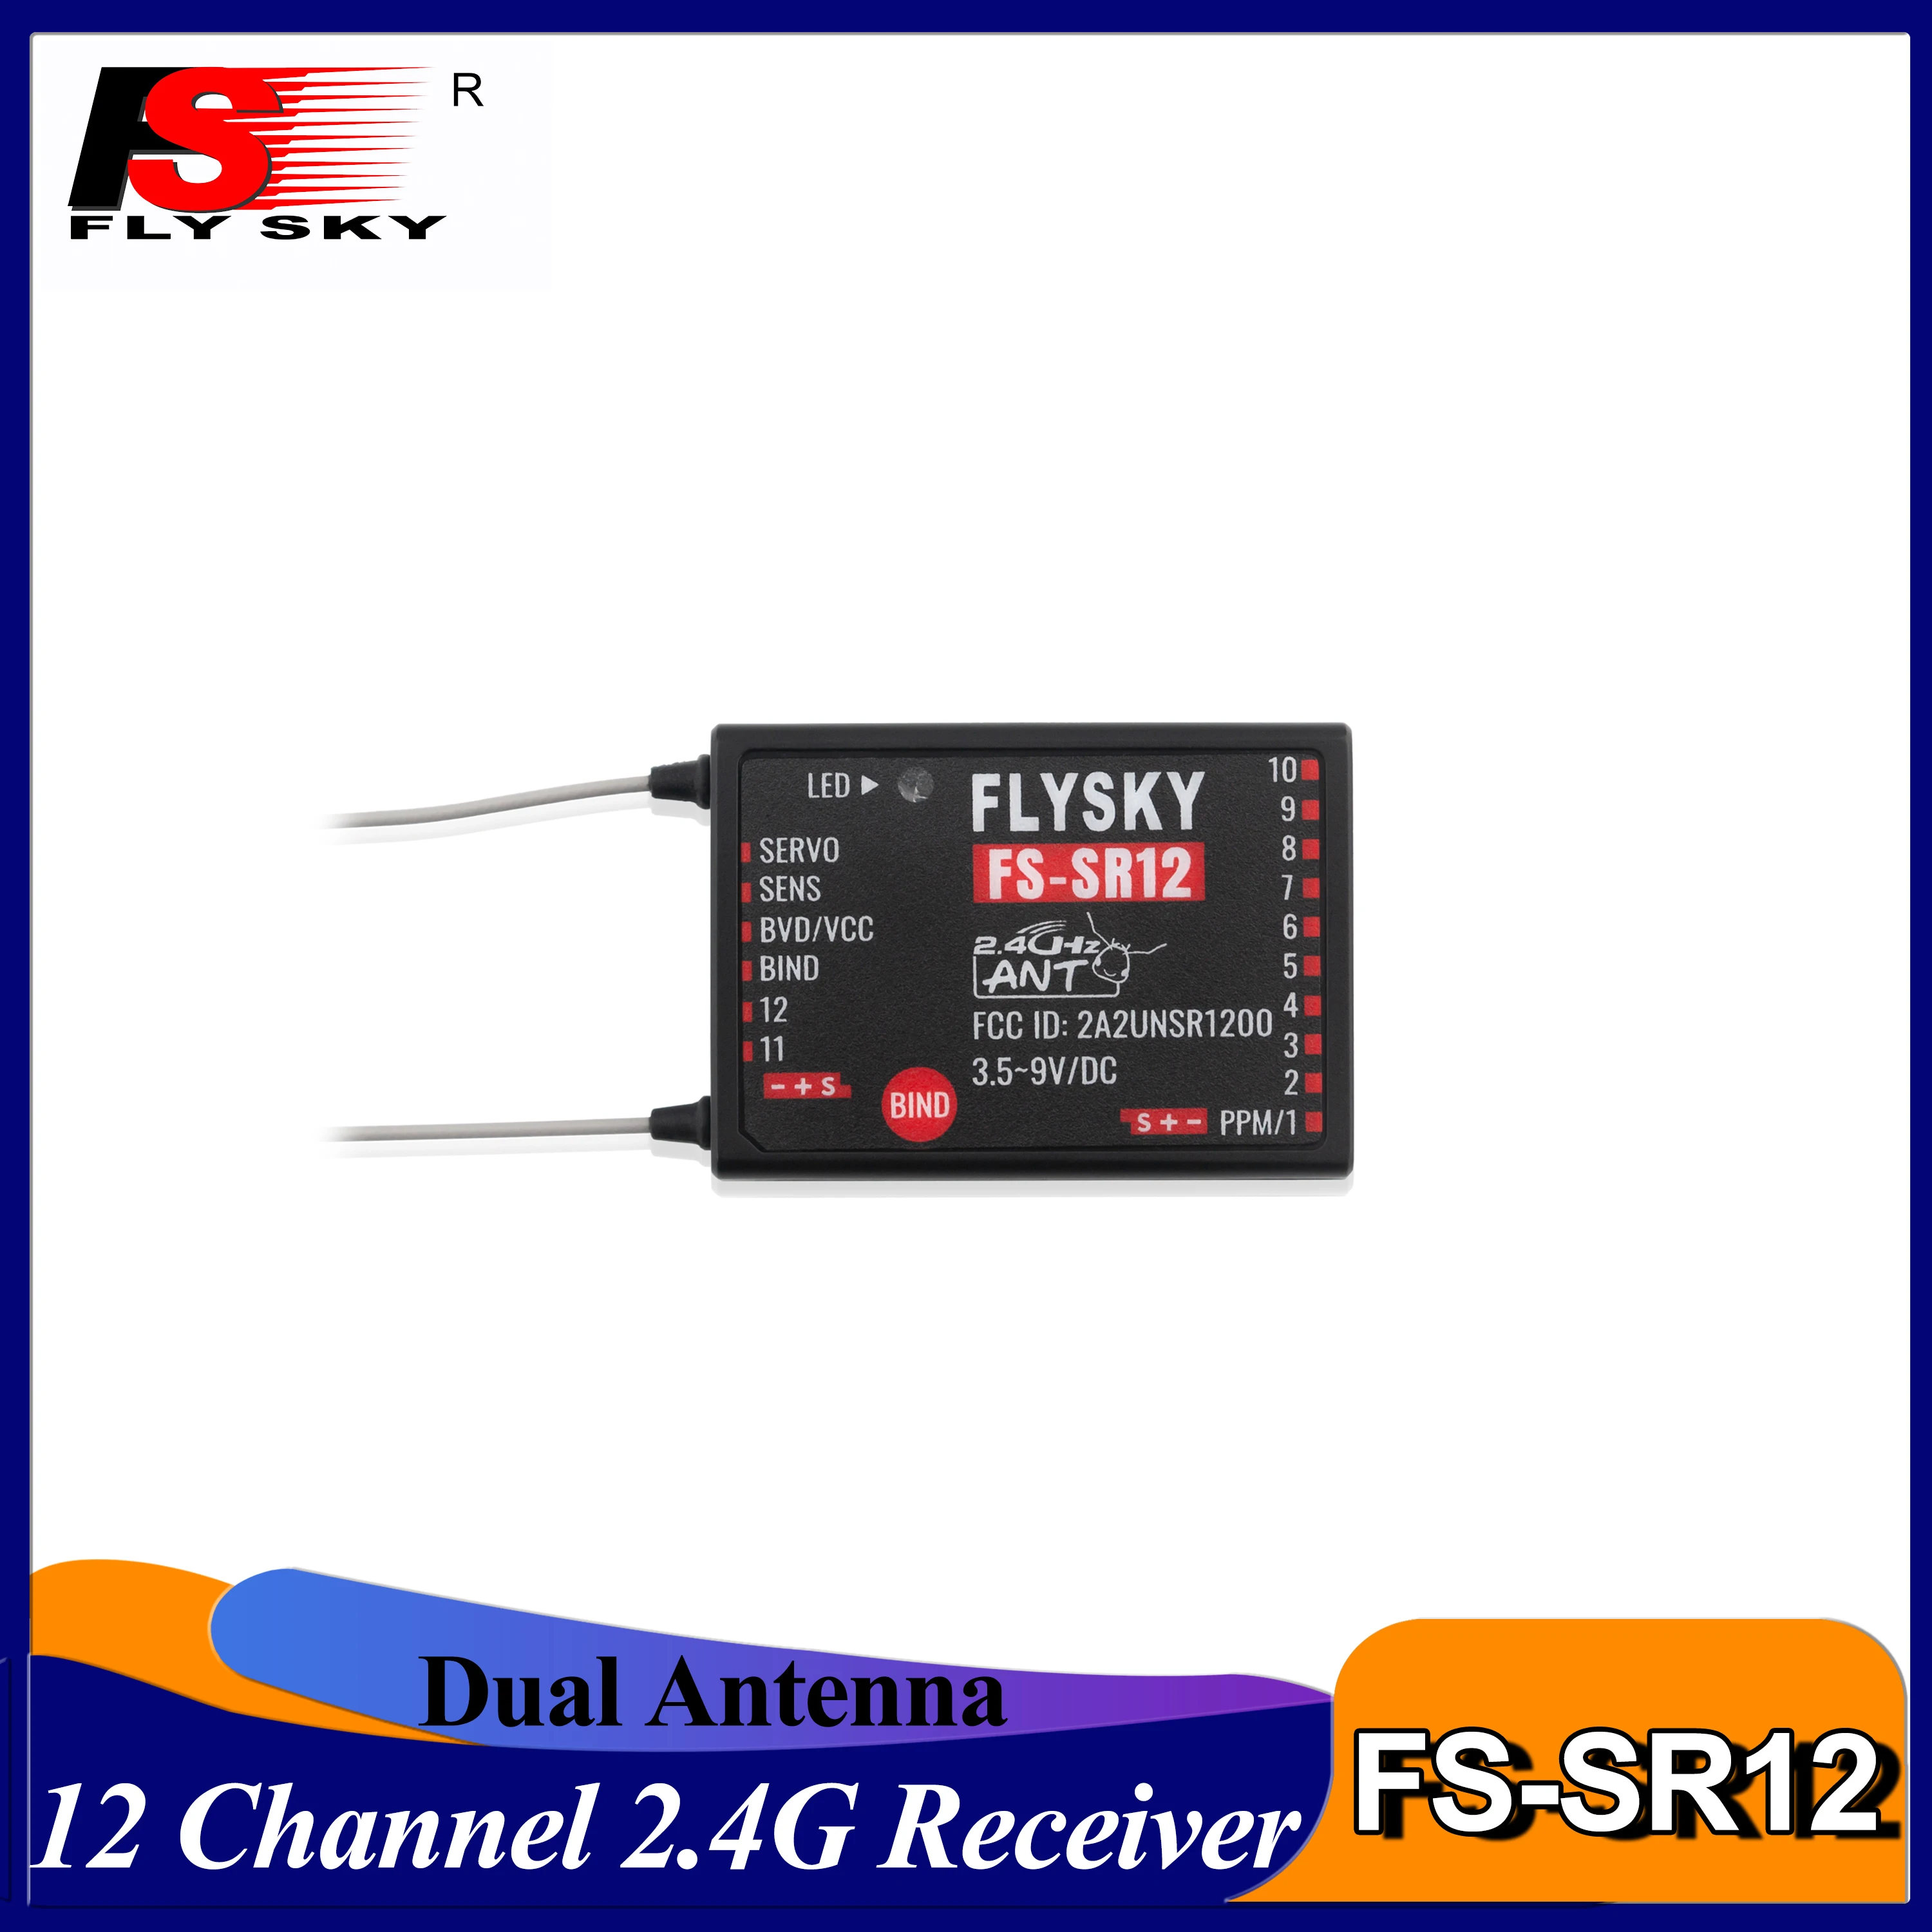 

FLYSKY FS-SR12 12 Channels 2.4G Receiver Dual Antenna for RC Fixed Wing Car Boat Robot Model Toy ANT Protocol Transmitter FS-ST8